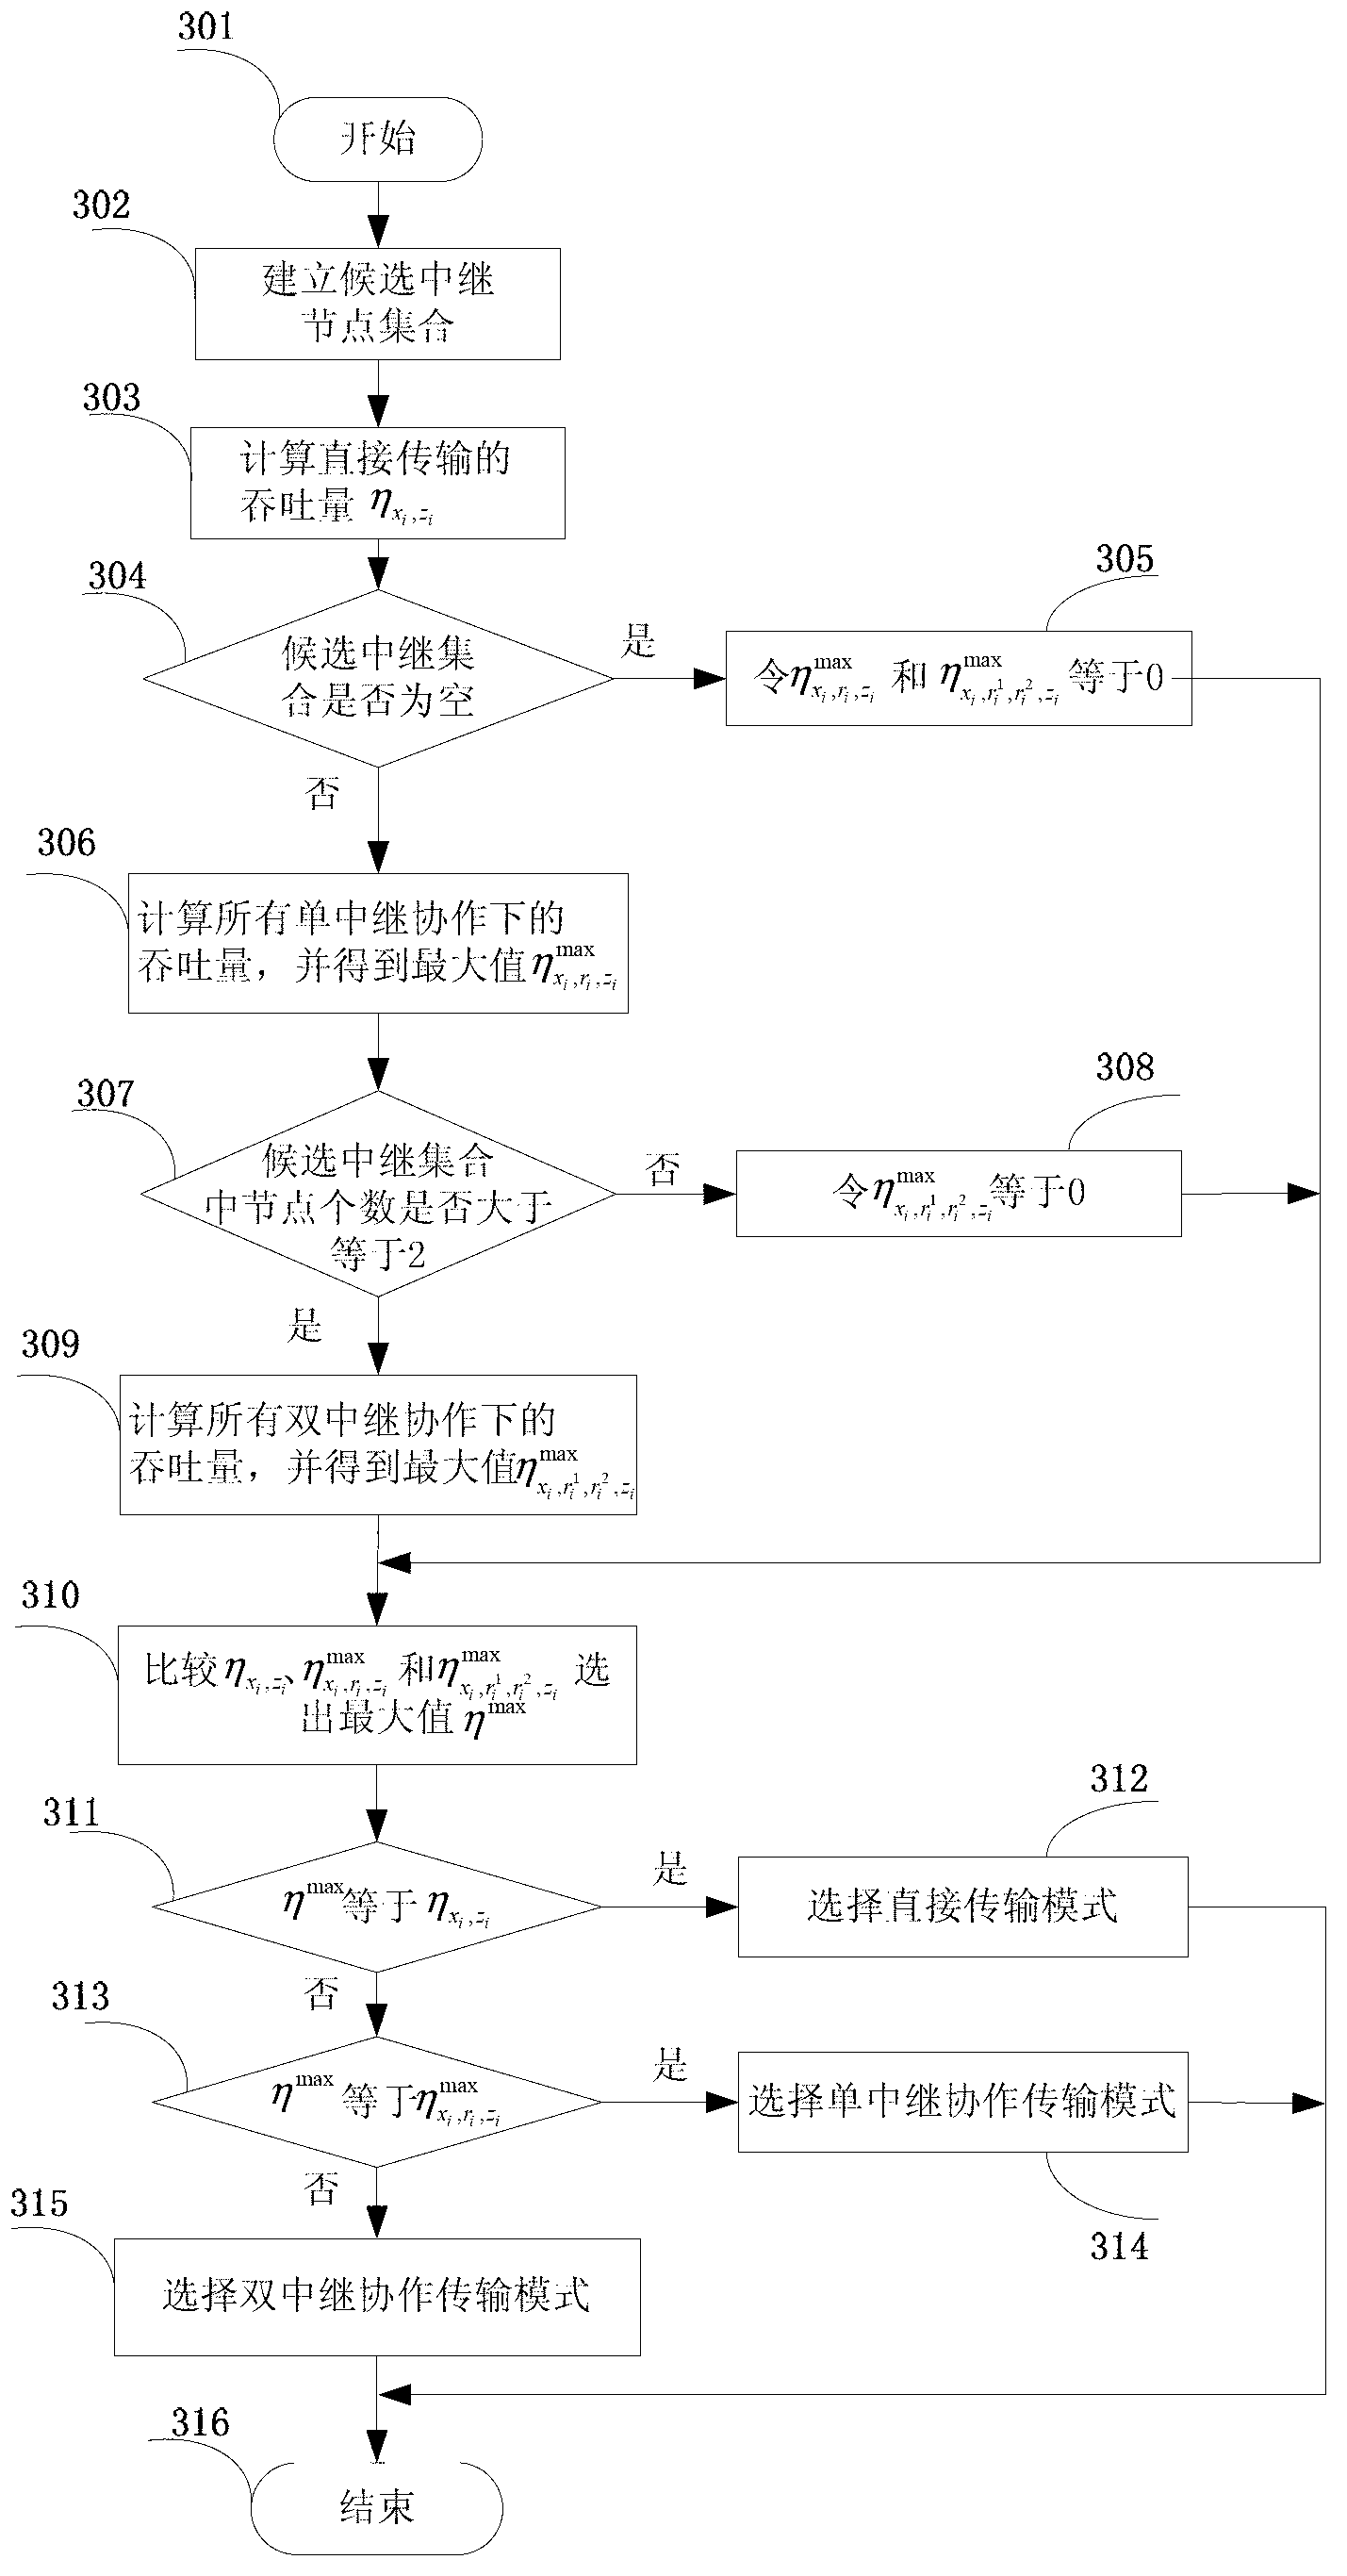 Cooperation routing method for improving wireless network throughput capacity